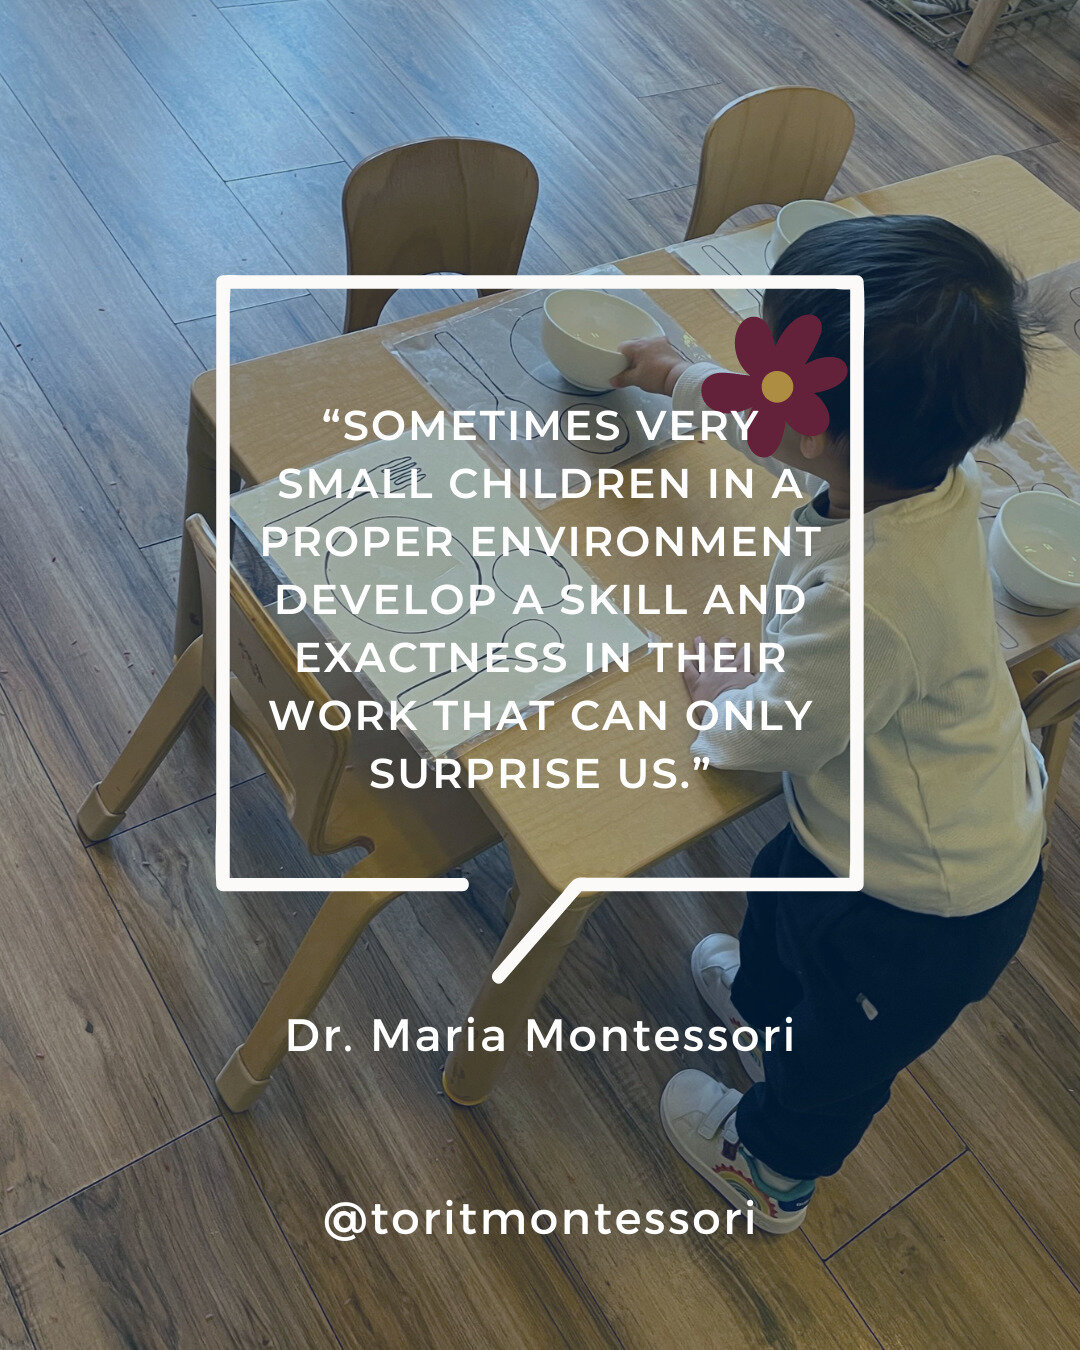 ✨The Prepared Environment✨

In the Montessori toddler classroom, the environment is designed to foster practical skills that aren't just tasks&mdash;they're building blocks for a lifetime of learning and independence.

Through independent exploration